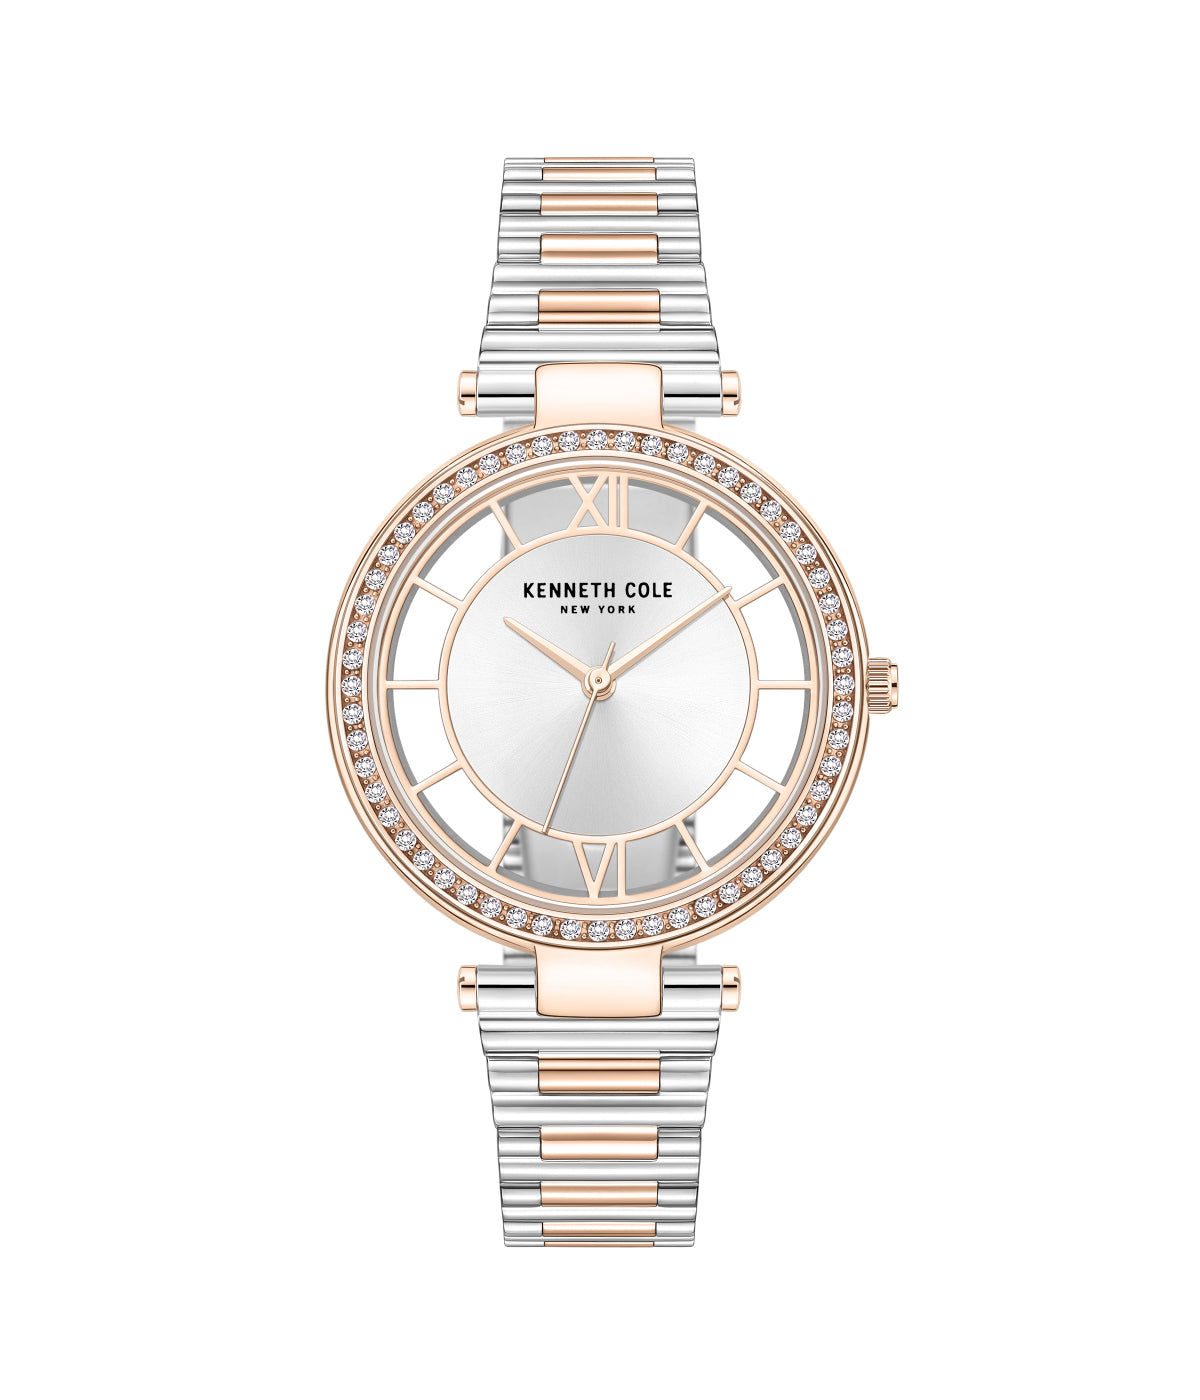 Kenneth Cole New York Transparency Watch 1 Two Tone 